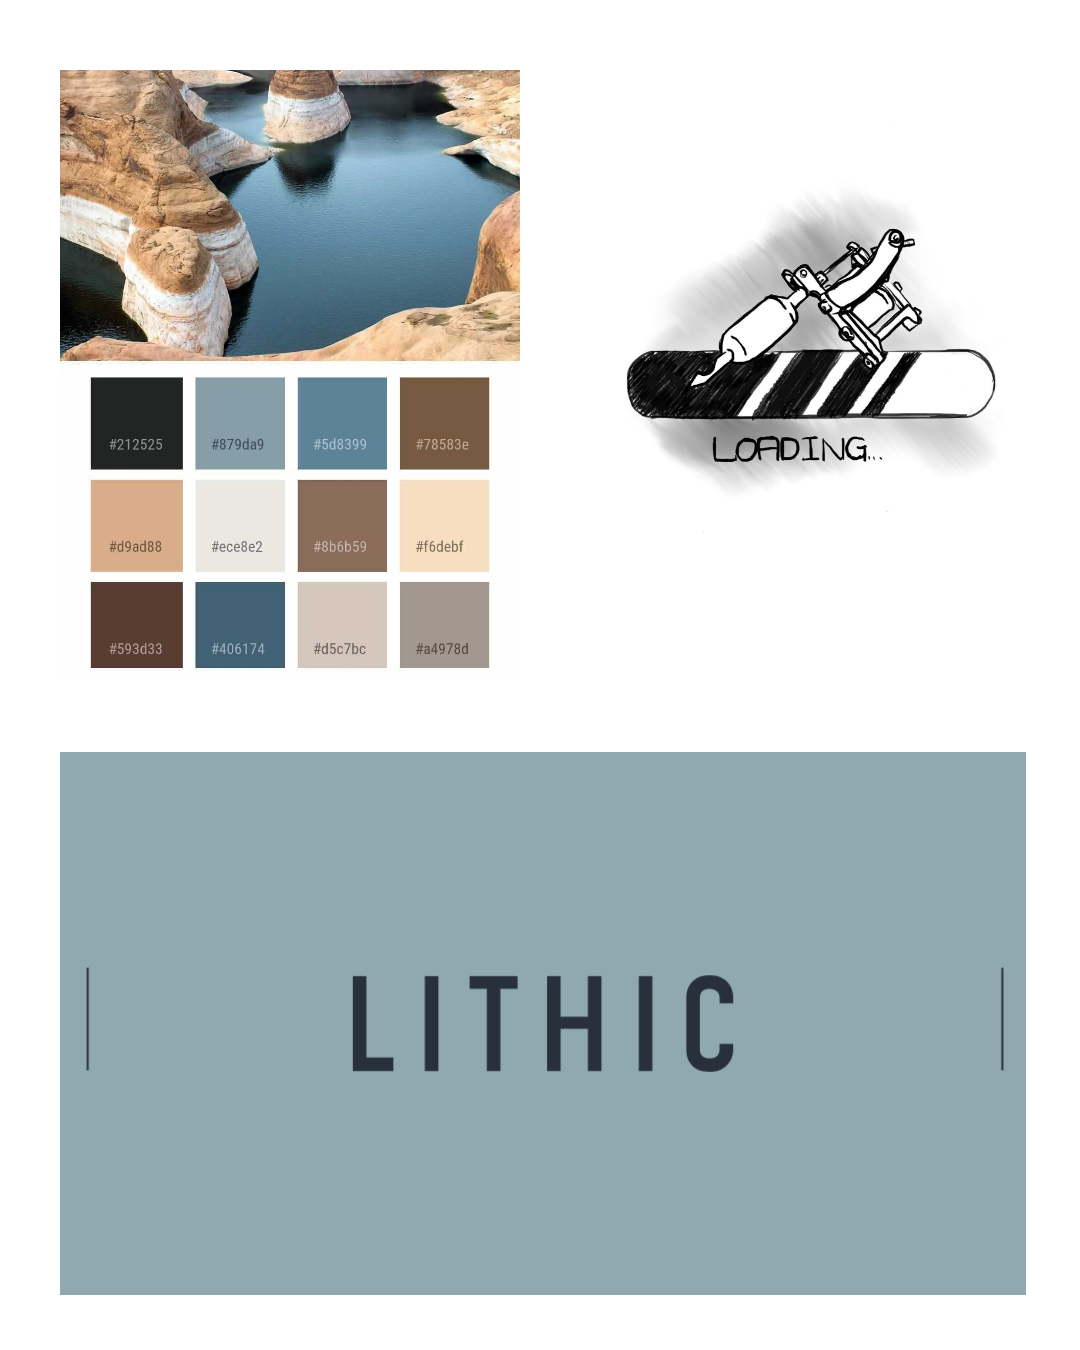 LITHIC Branding.png